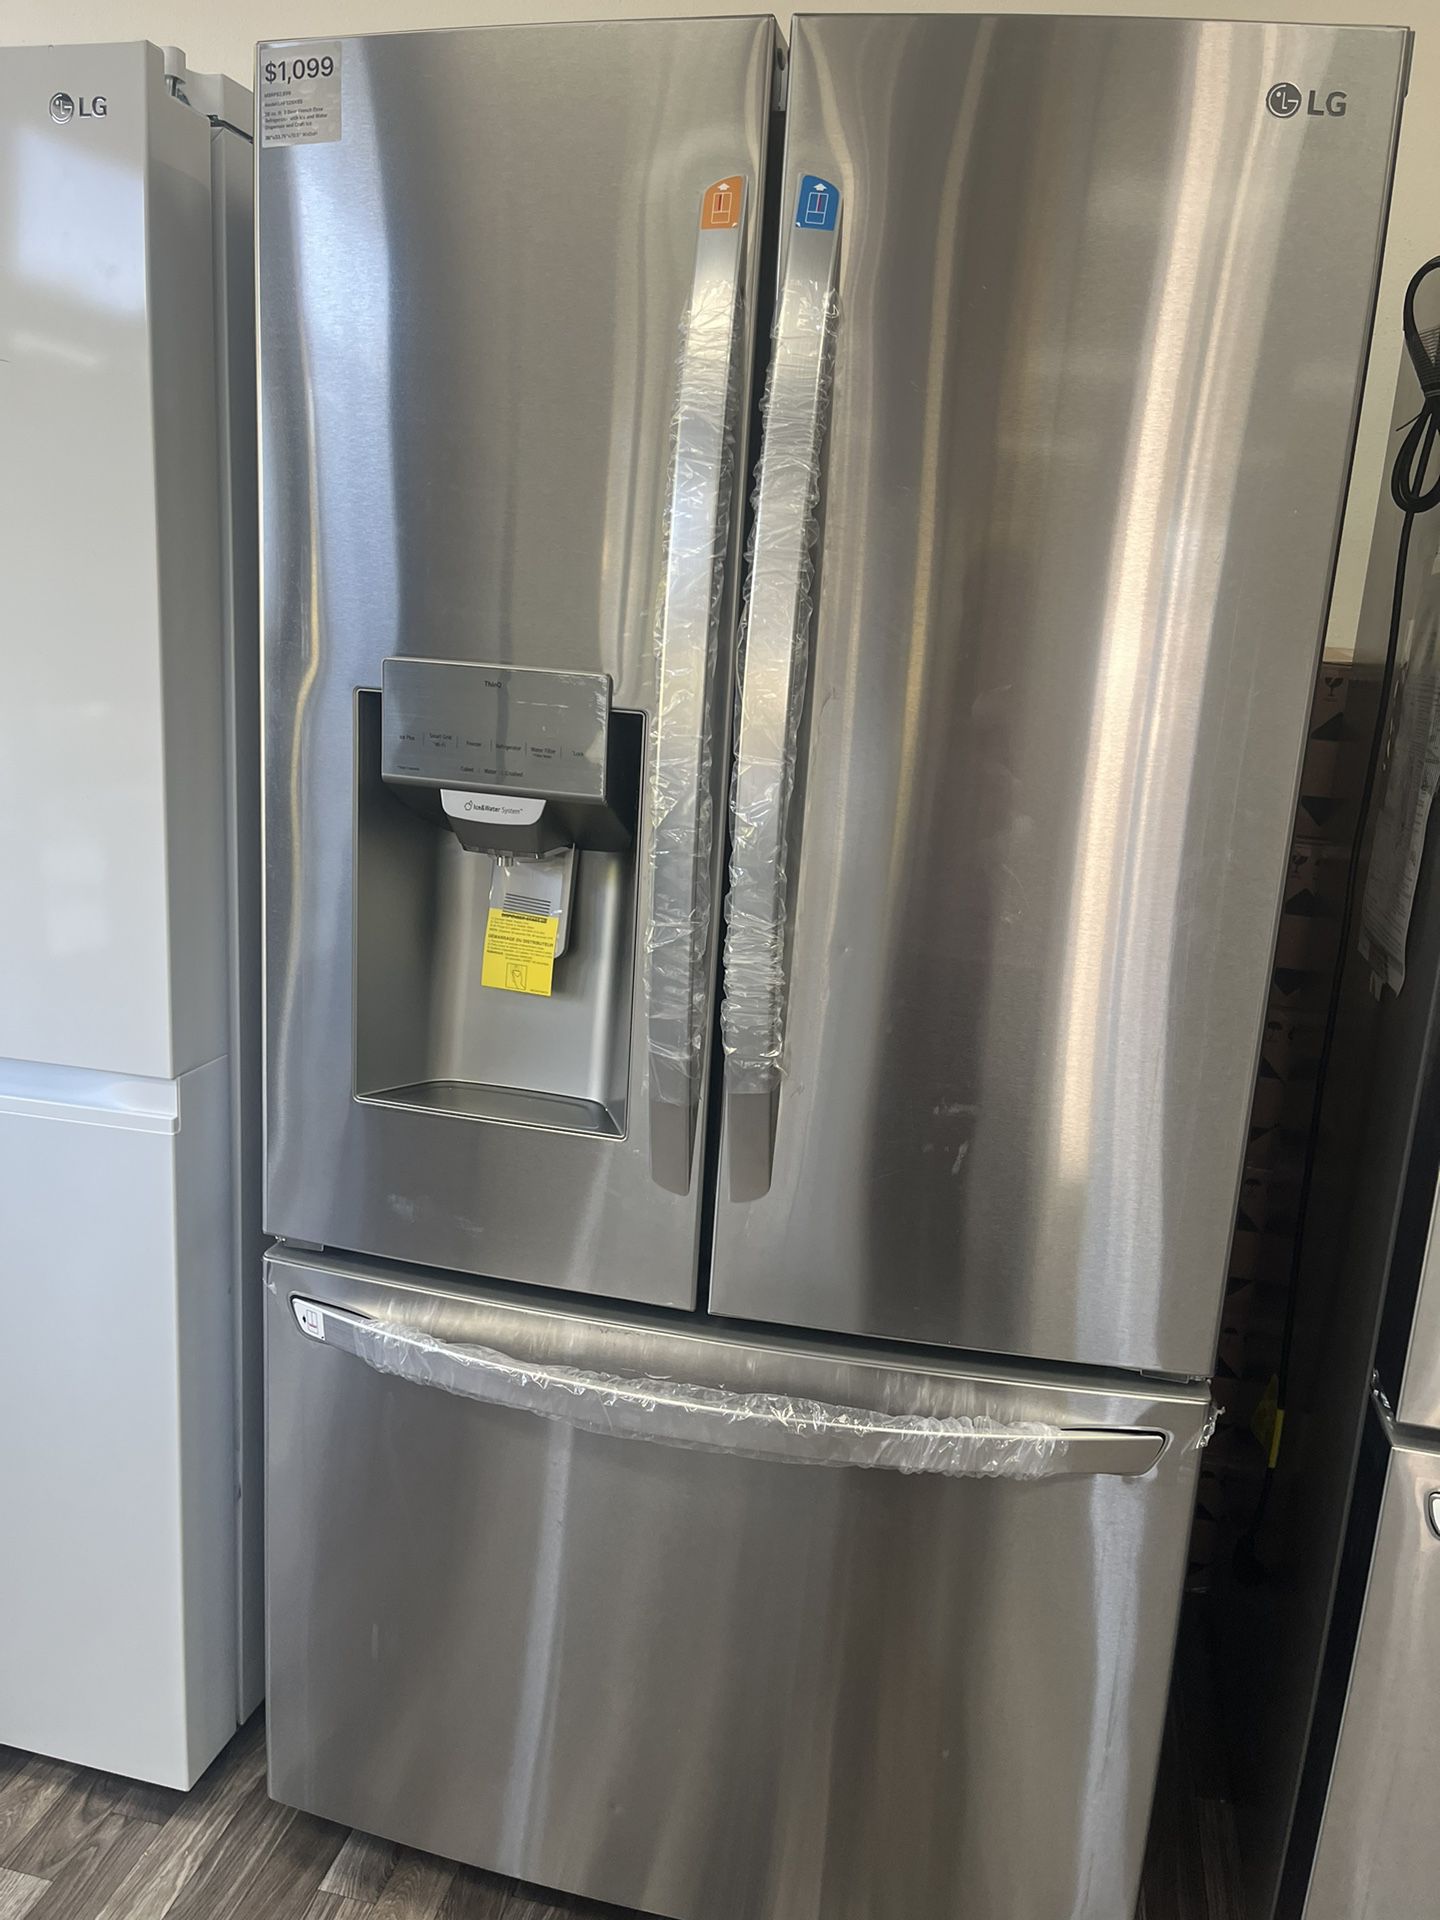 Limited Time/ Open Box French Door Refrigerator With Dual Ice Maker WAS$2899 Now$1099